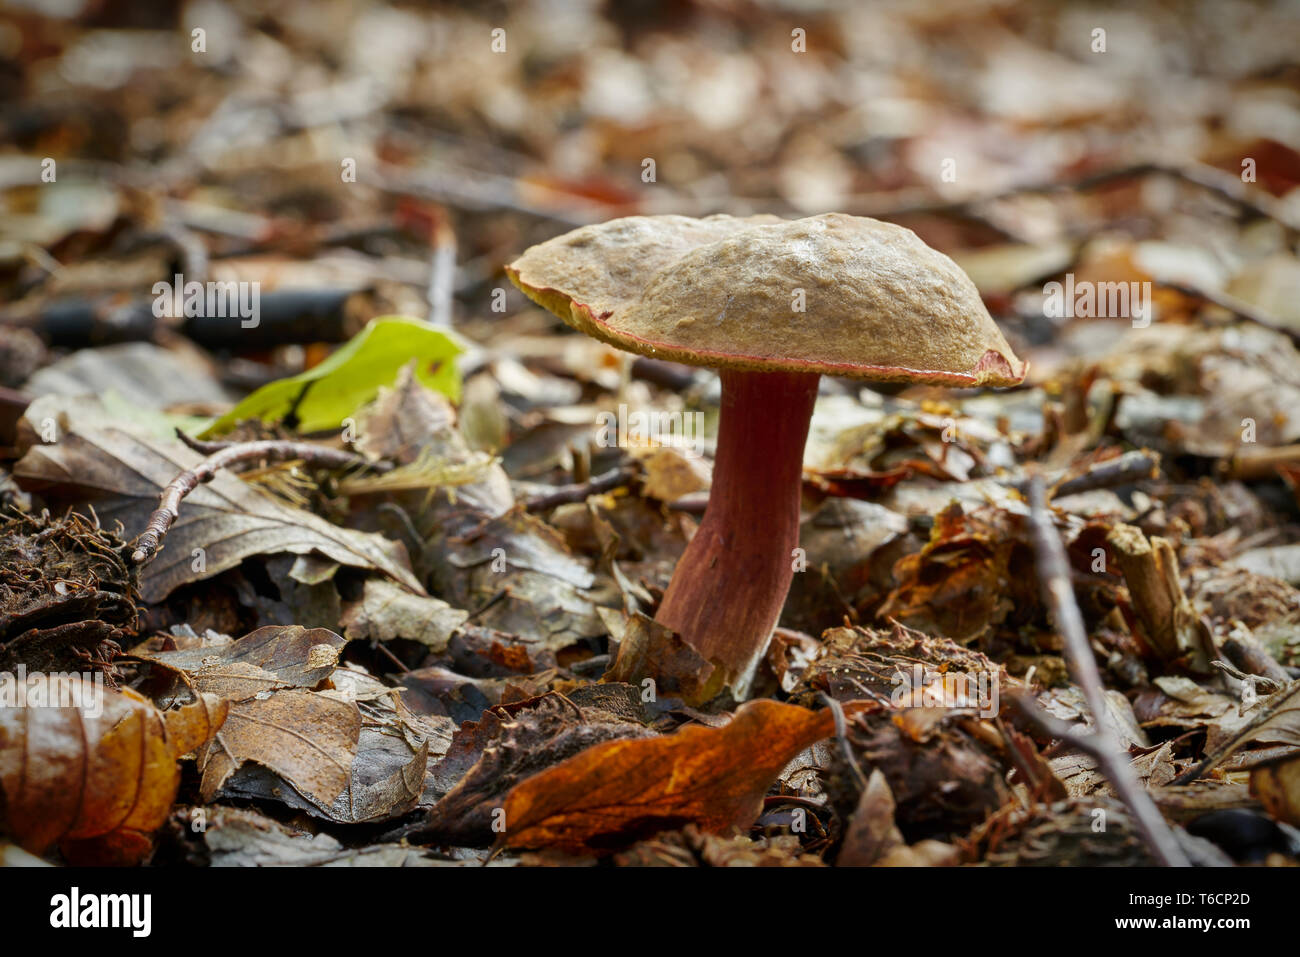 Xerocomellus chrysenteron in a forest in autumn Stock Photo